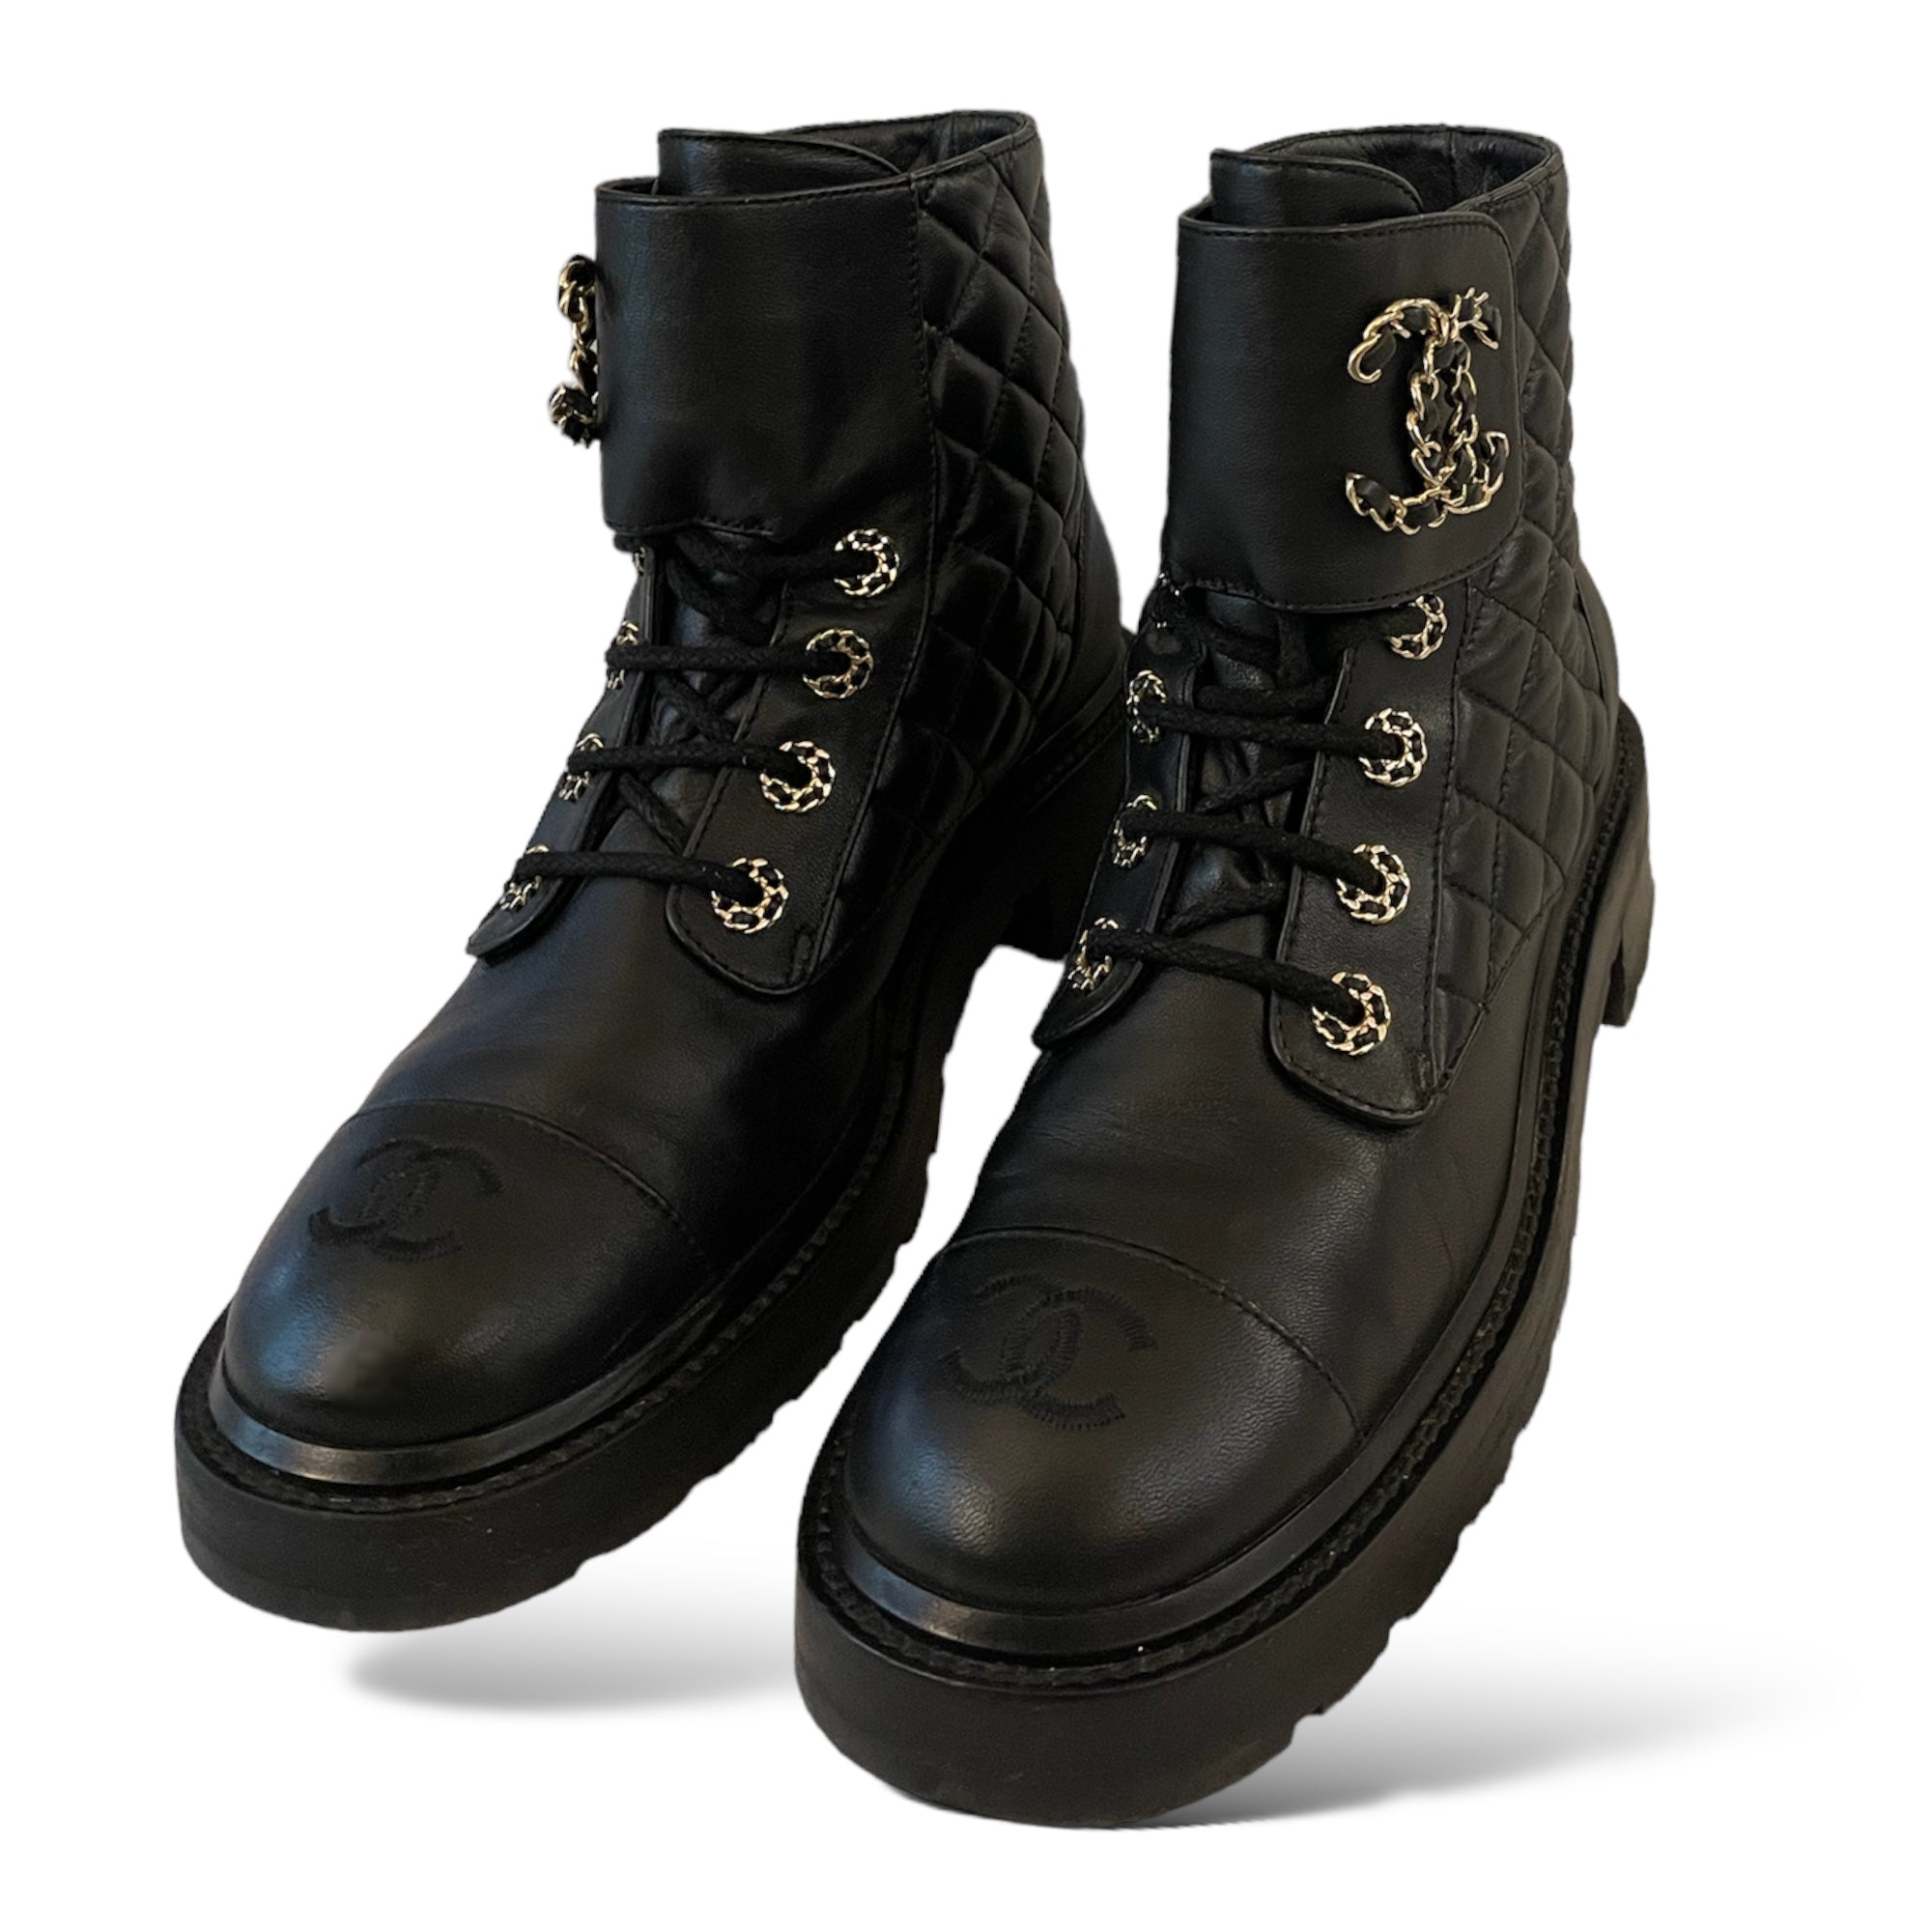 CHANEL Fall 2021 Black Lambskin Lace-Up Boots
|Size: 38|